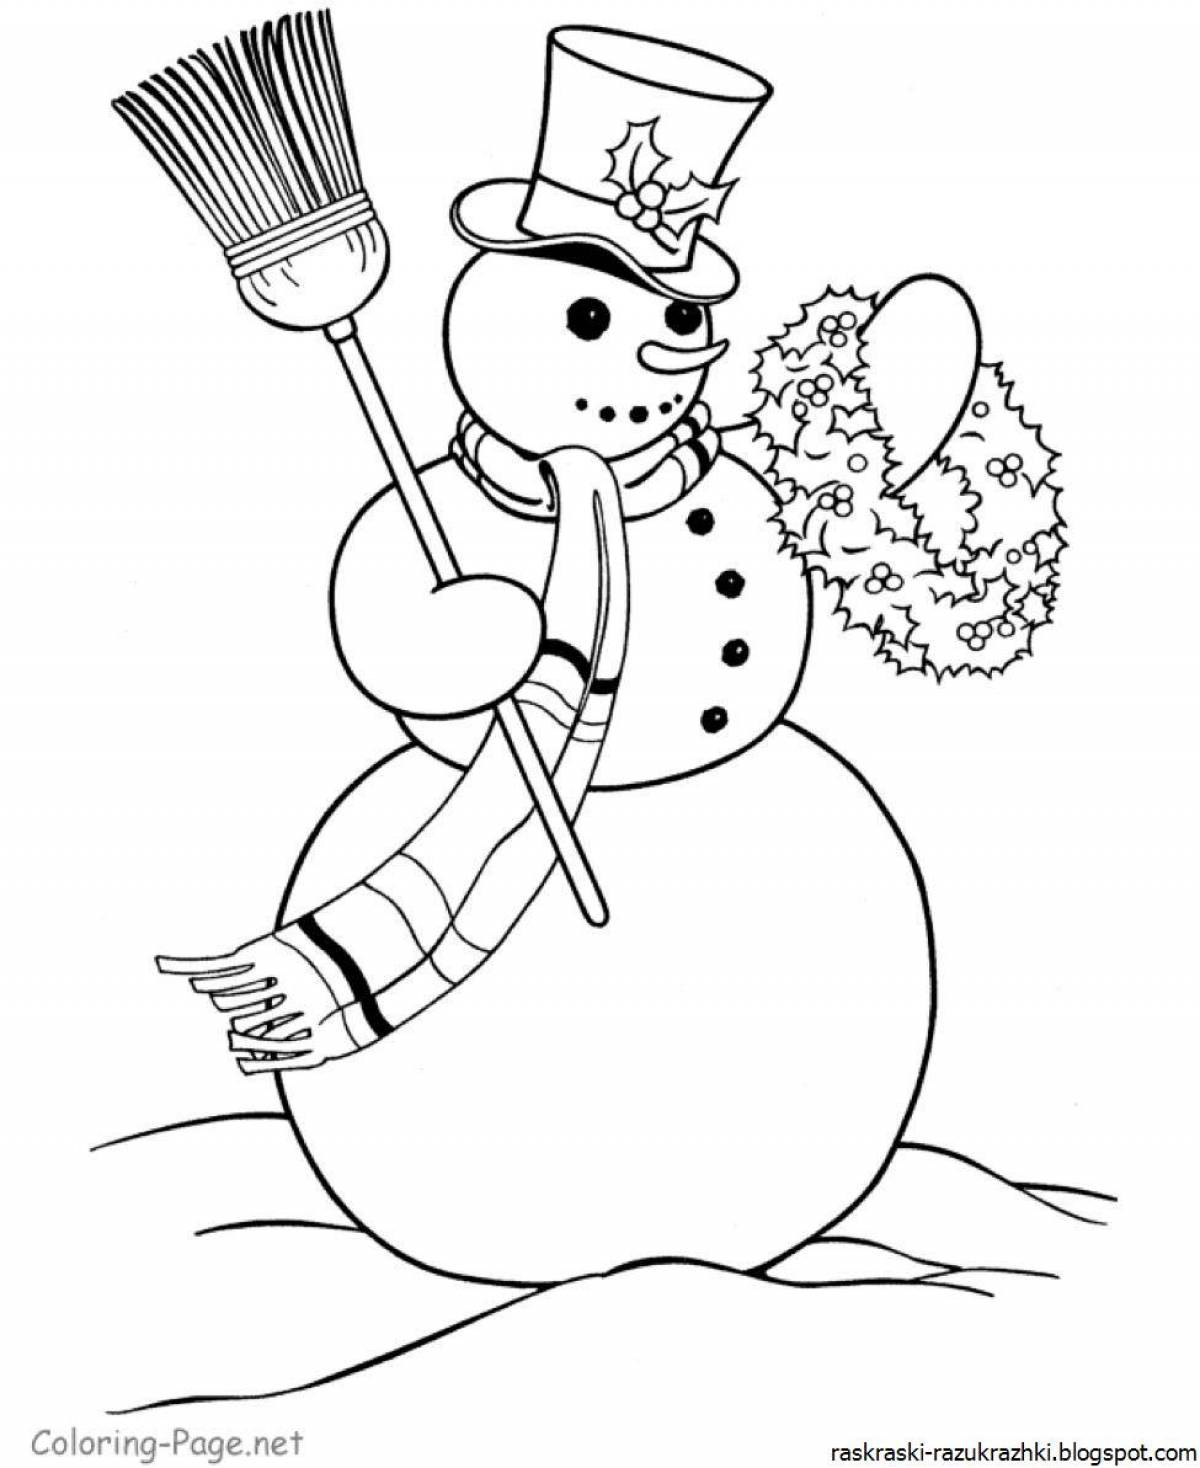 Coloring happy snowman for kids